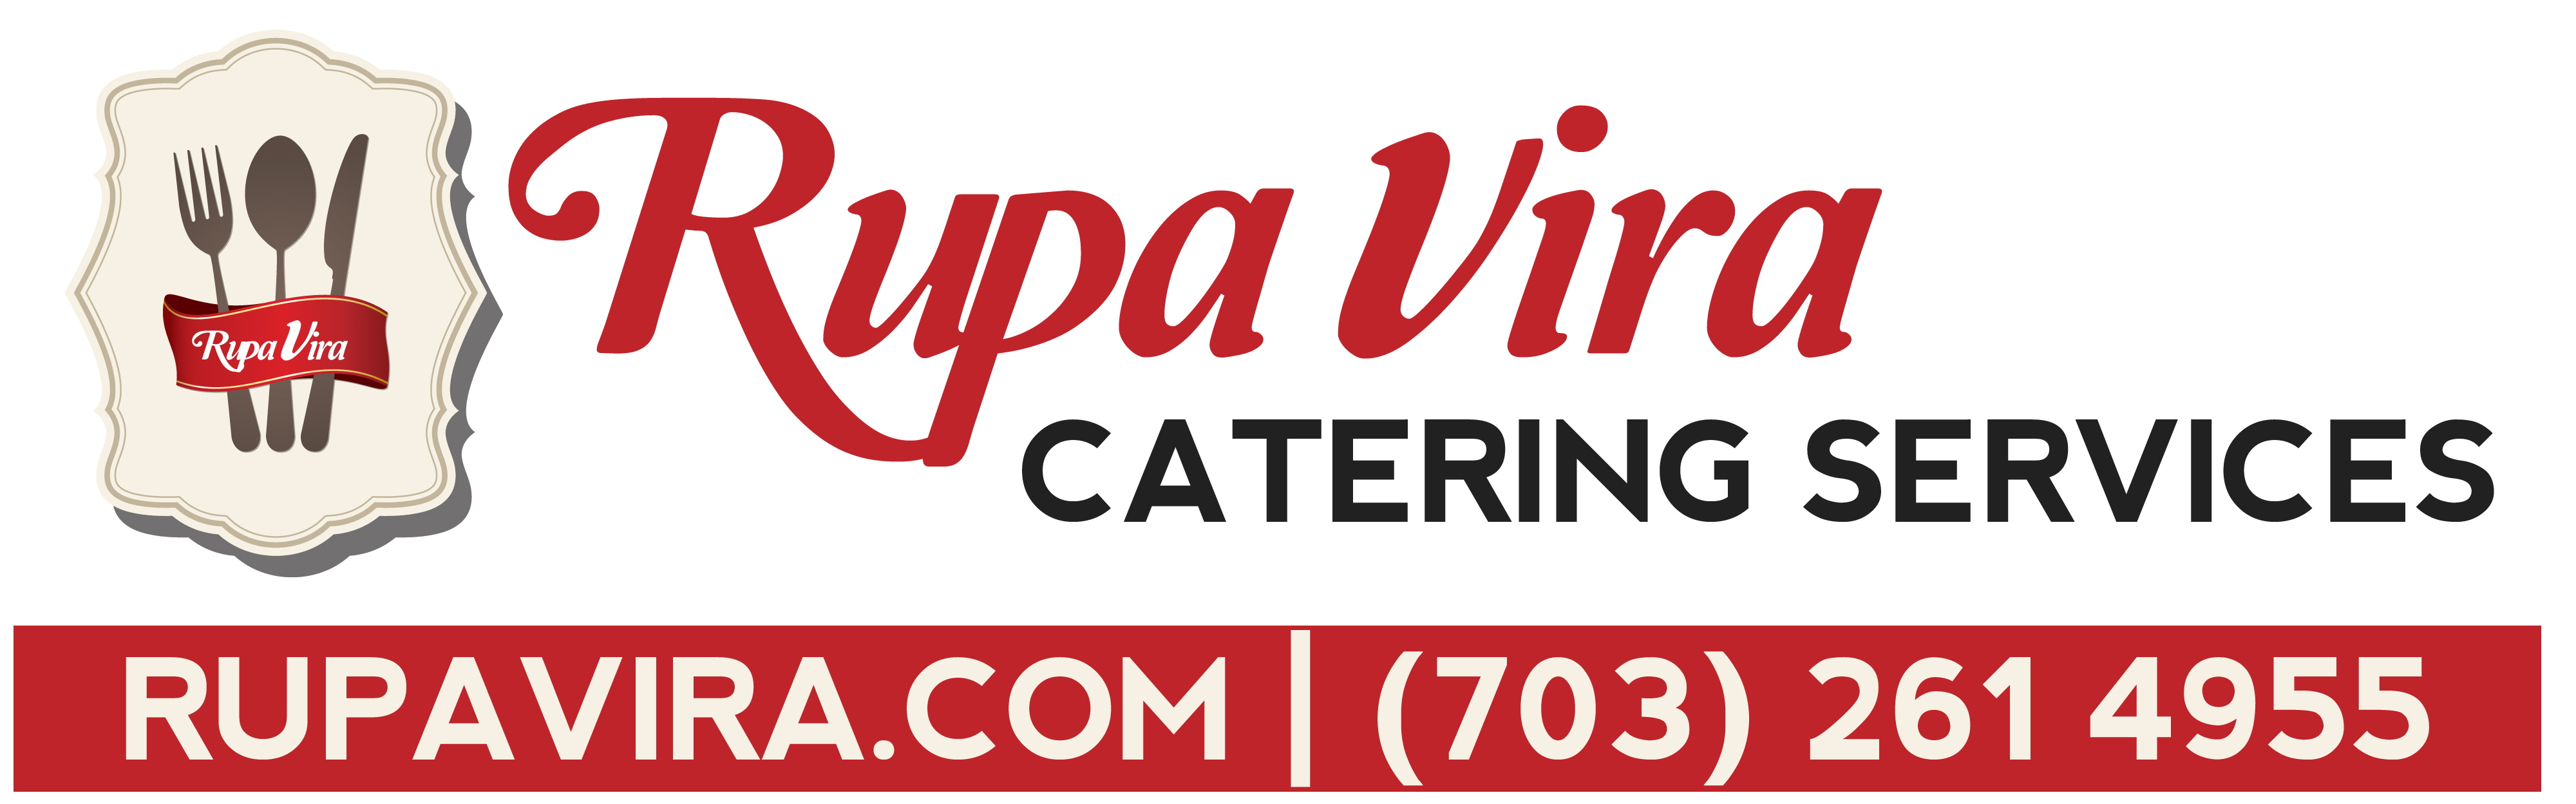 Rupa Vira's Catering Services Photo